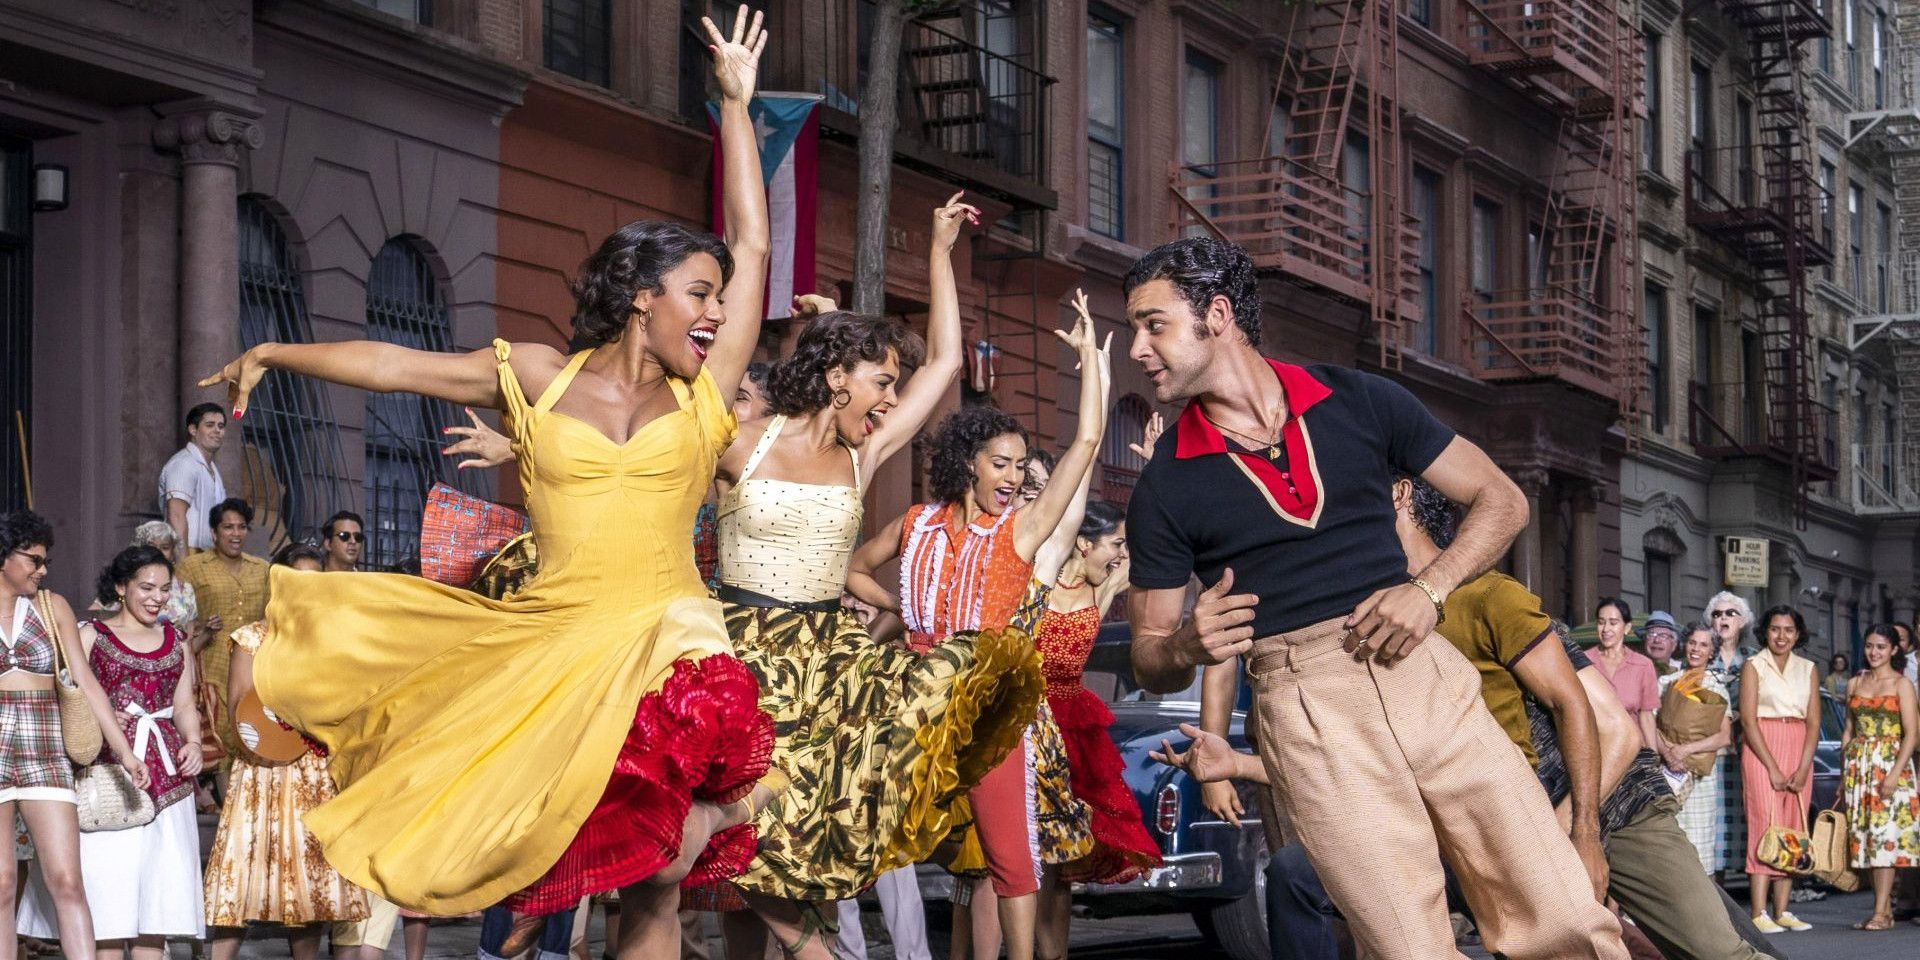 Anita, Bernardo, and the Puerto Rican community dance in the streets to "America" in 2021's 'West Side Story' remake